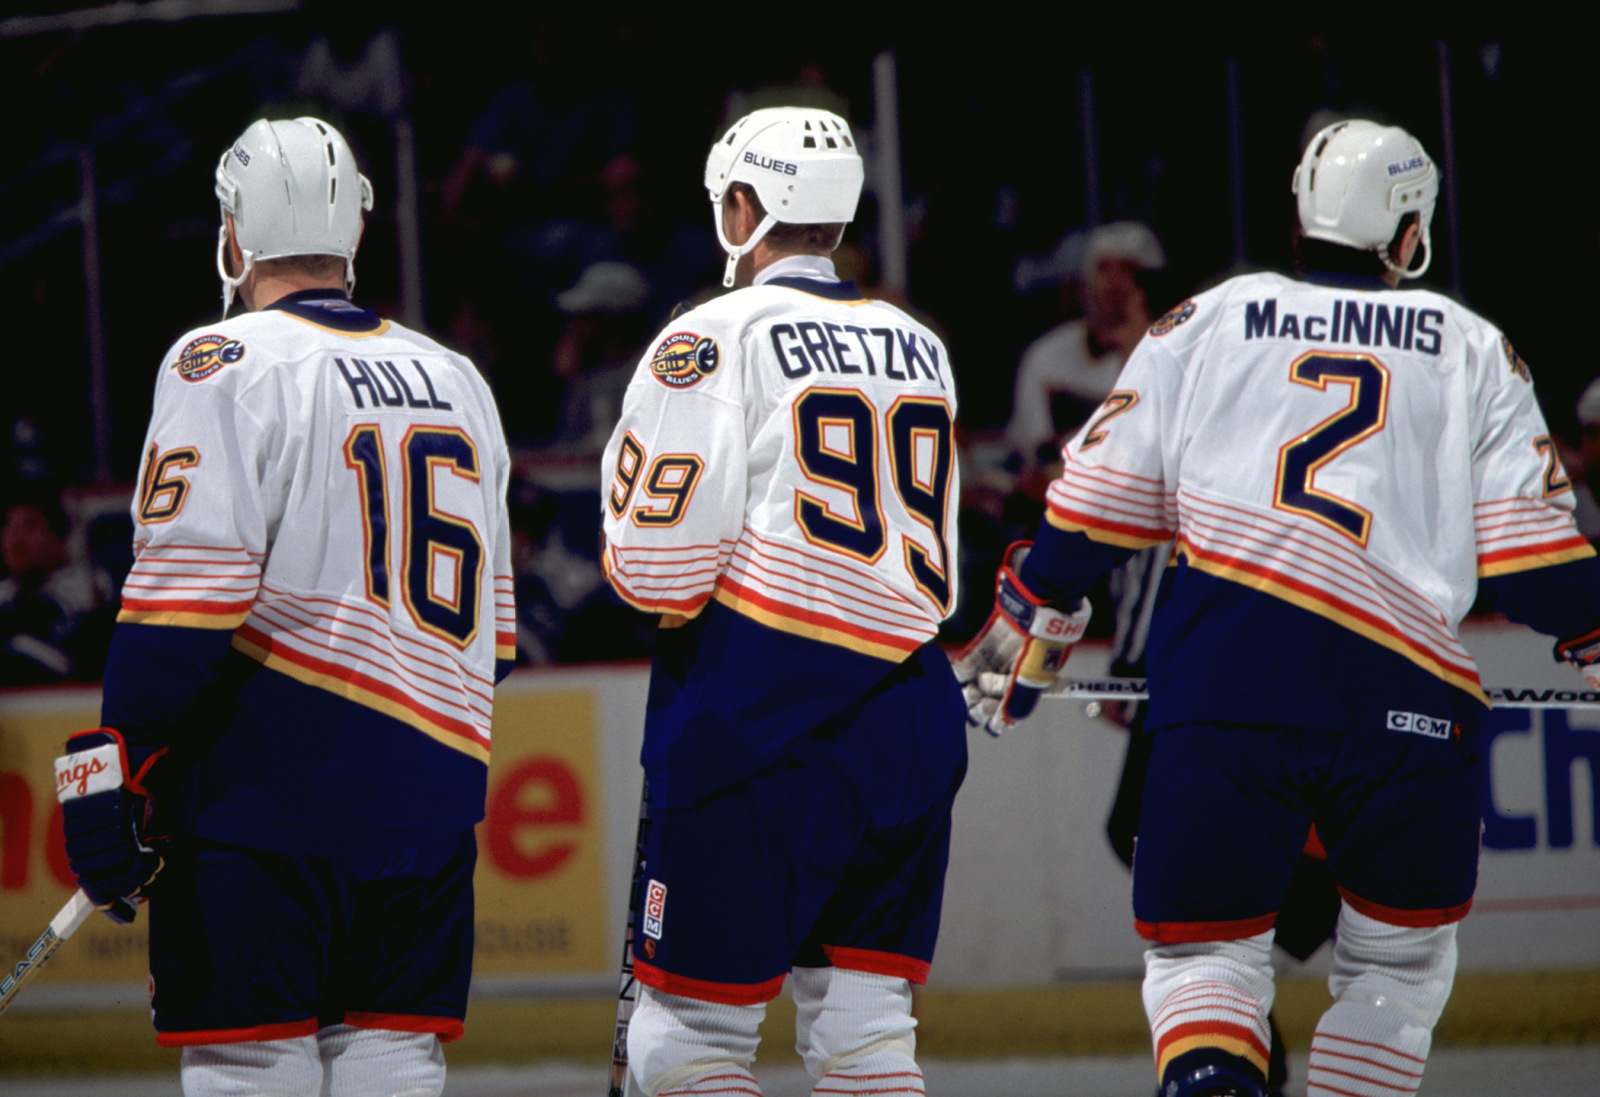 Wayne Gretzky's 1995-96 NHL Season with the Blues, One for the Ages